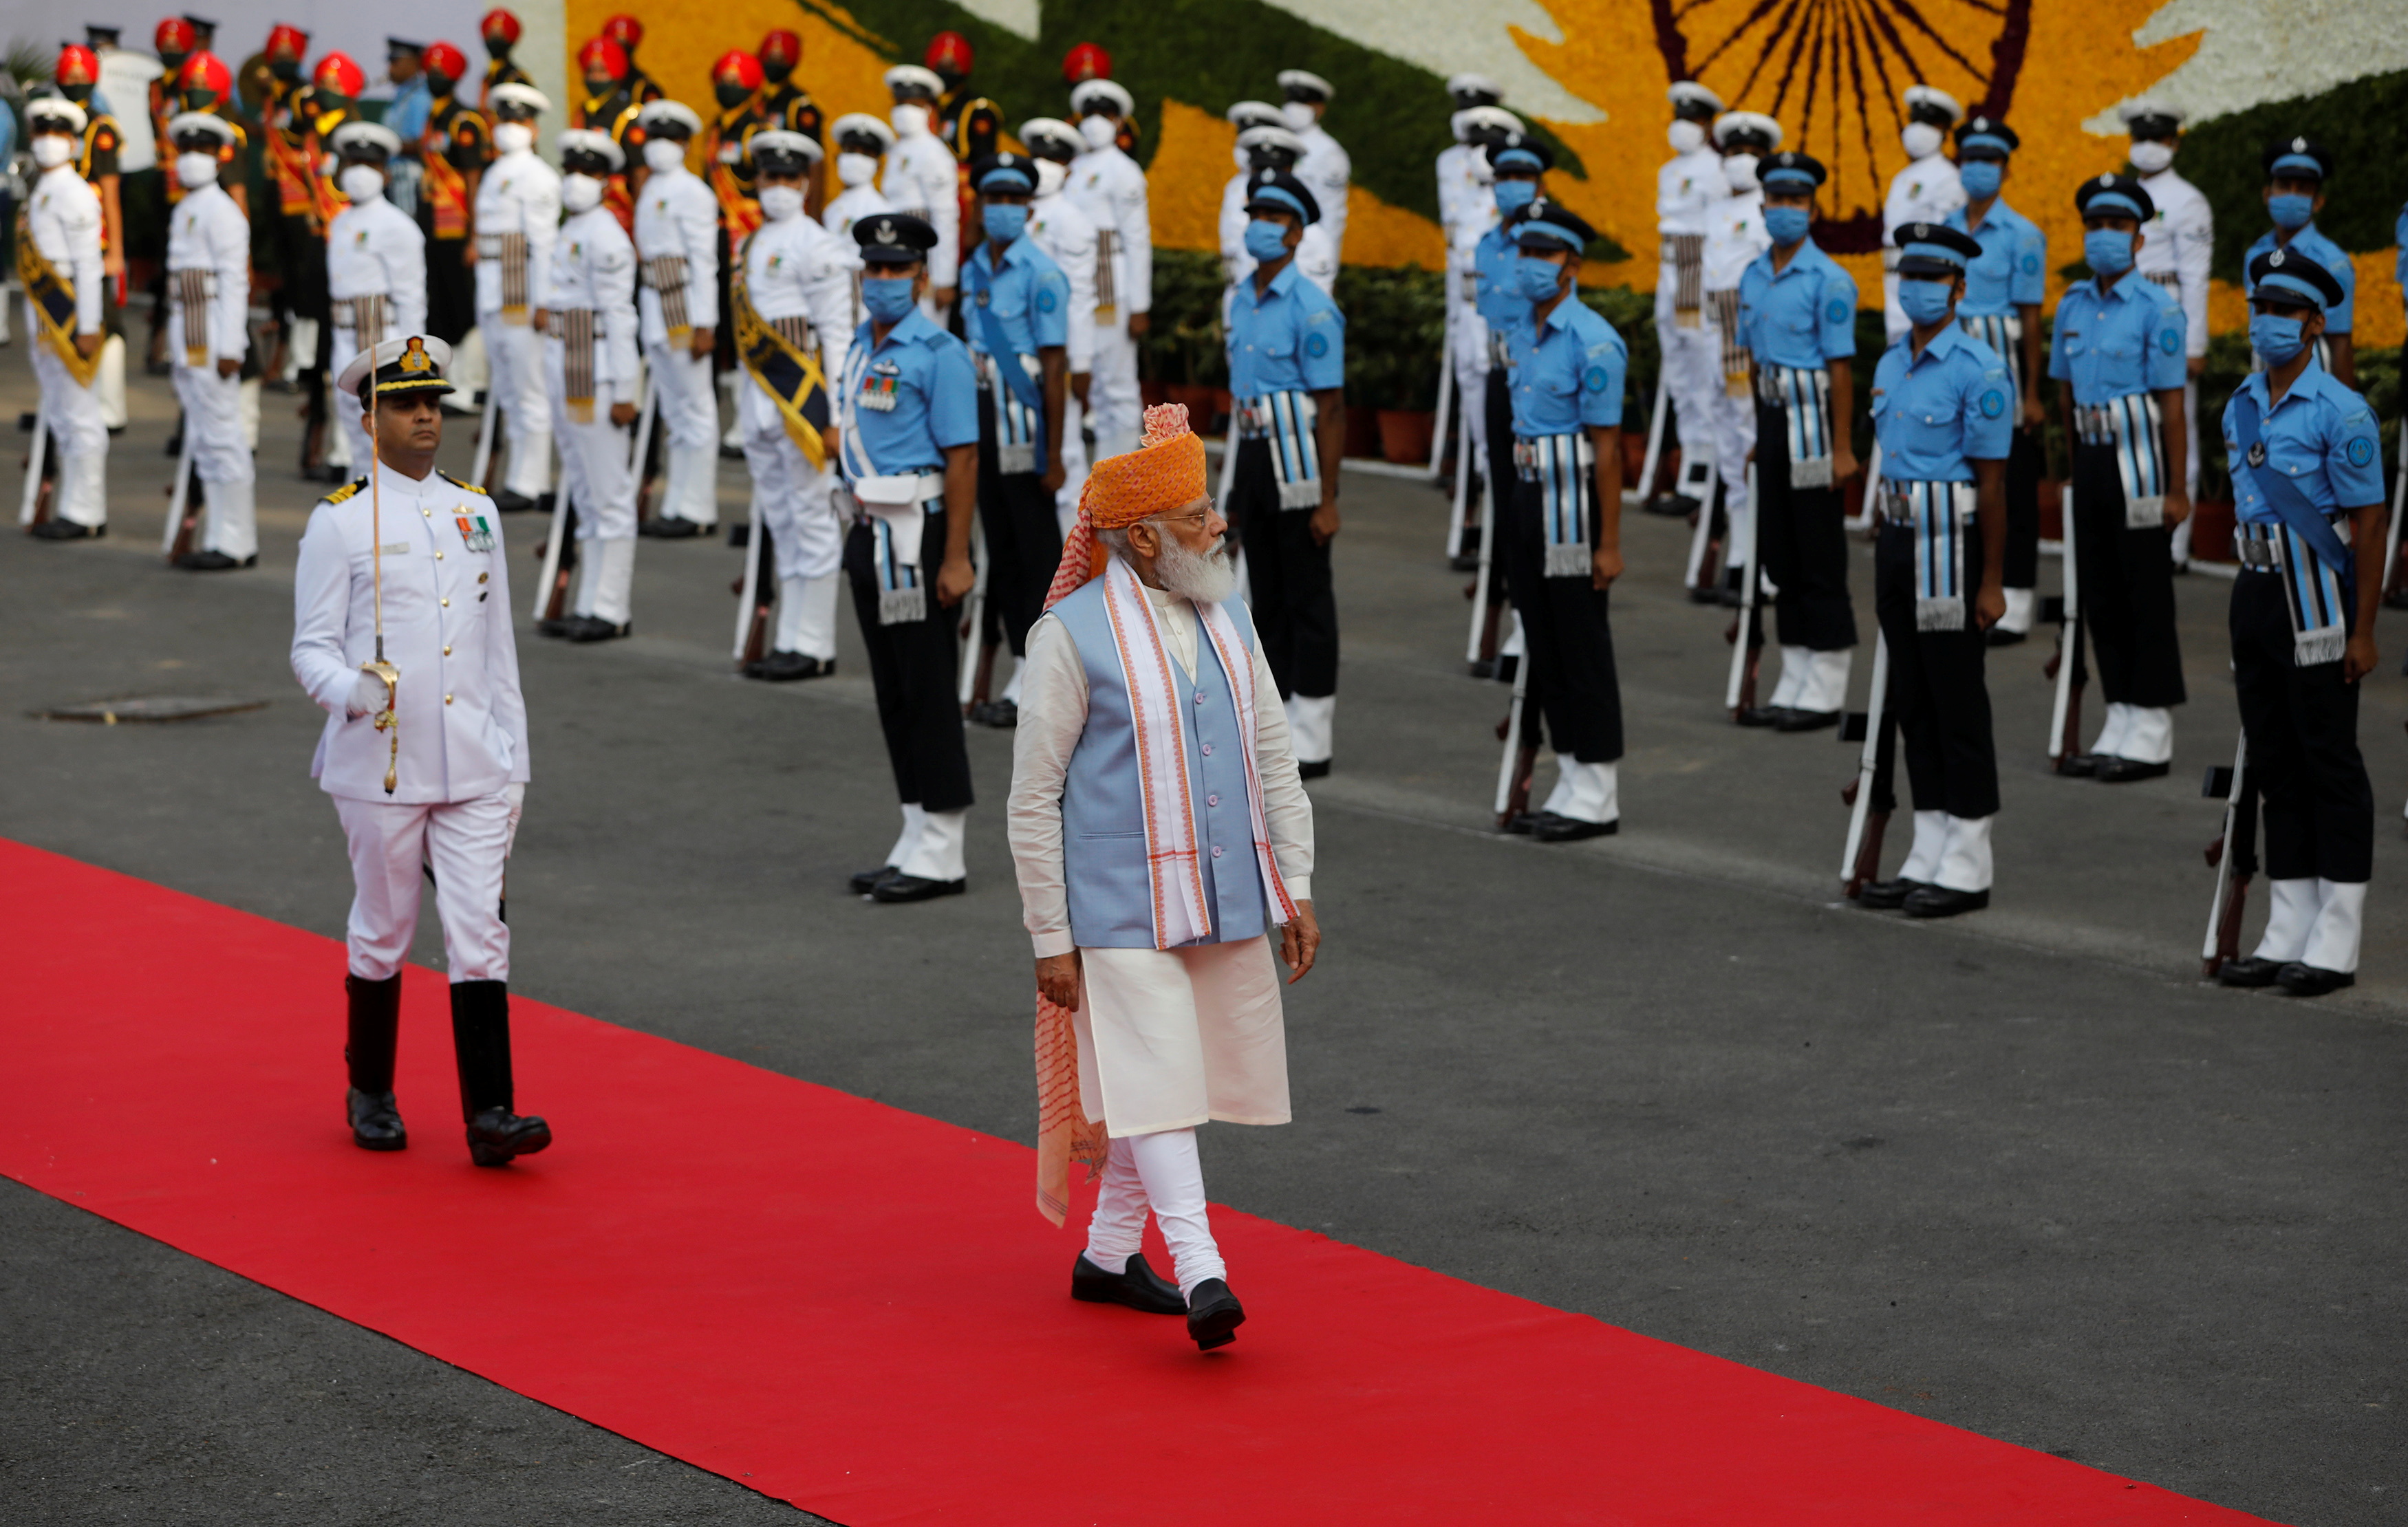 Indian Prime Minister Narendra Modi inspects the honour guard during Independence Day celebrations at the historic Red Fort in Delhi